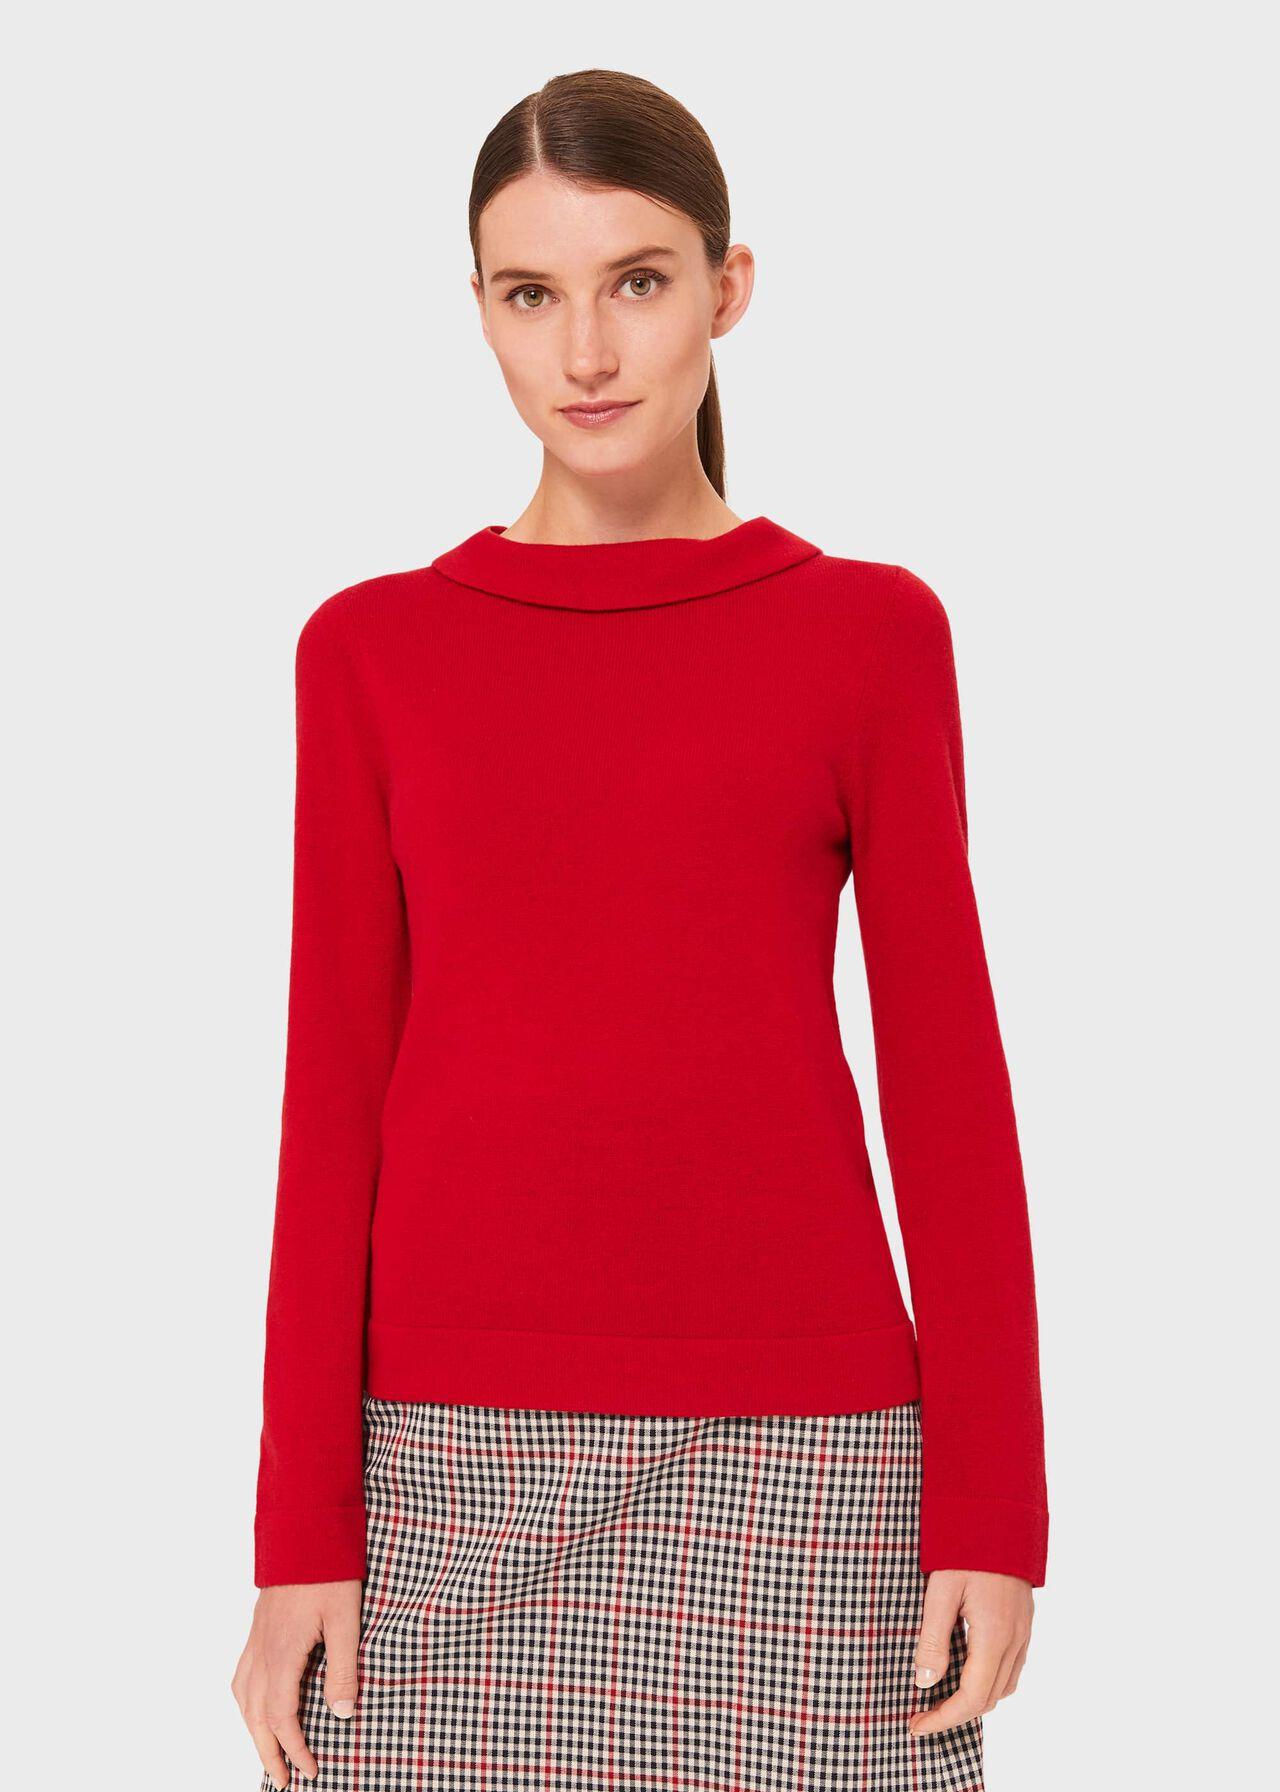 Hobbs Audrey Wool Cashmere Sweater in Red - Lyst